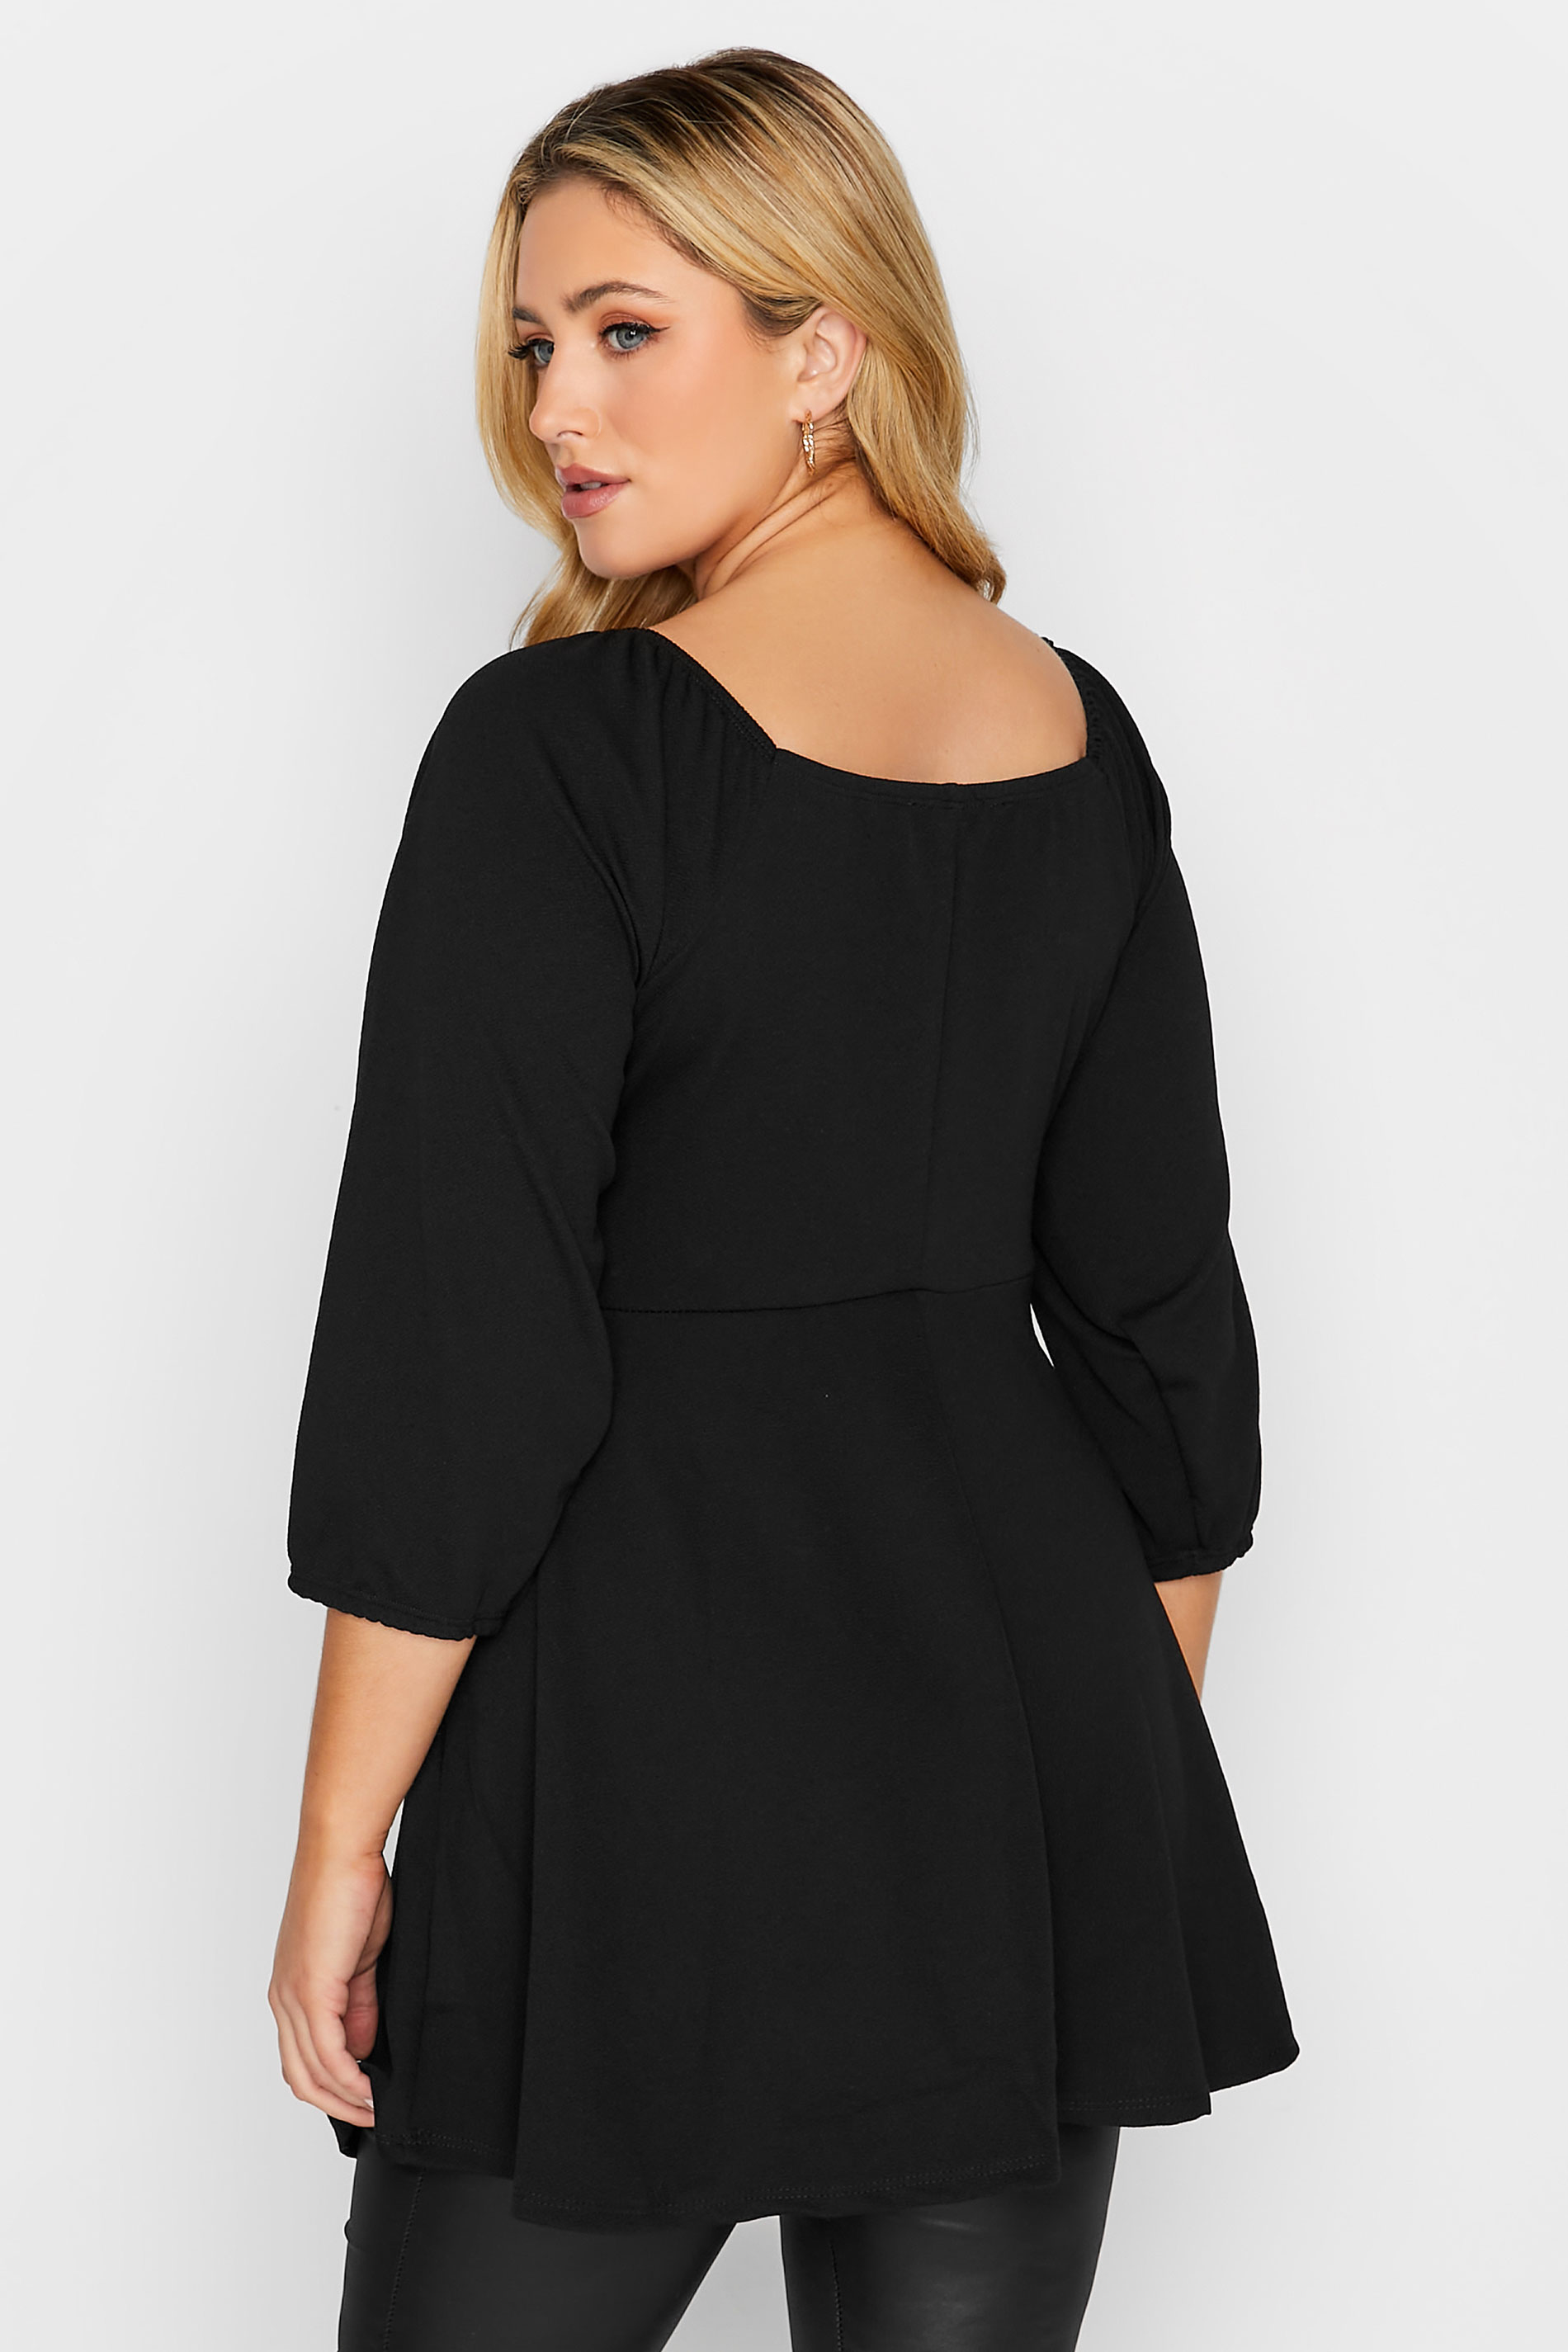 LIMITED COLLECTION Curve Black V-Bar Peplum Top | Yours Clothing  3